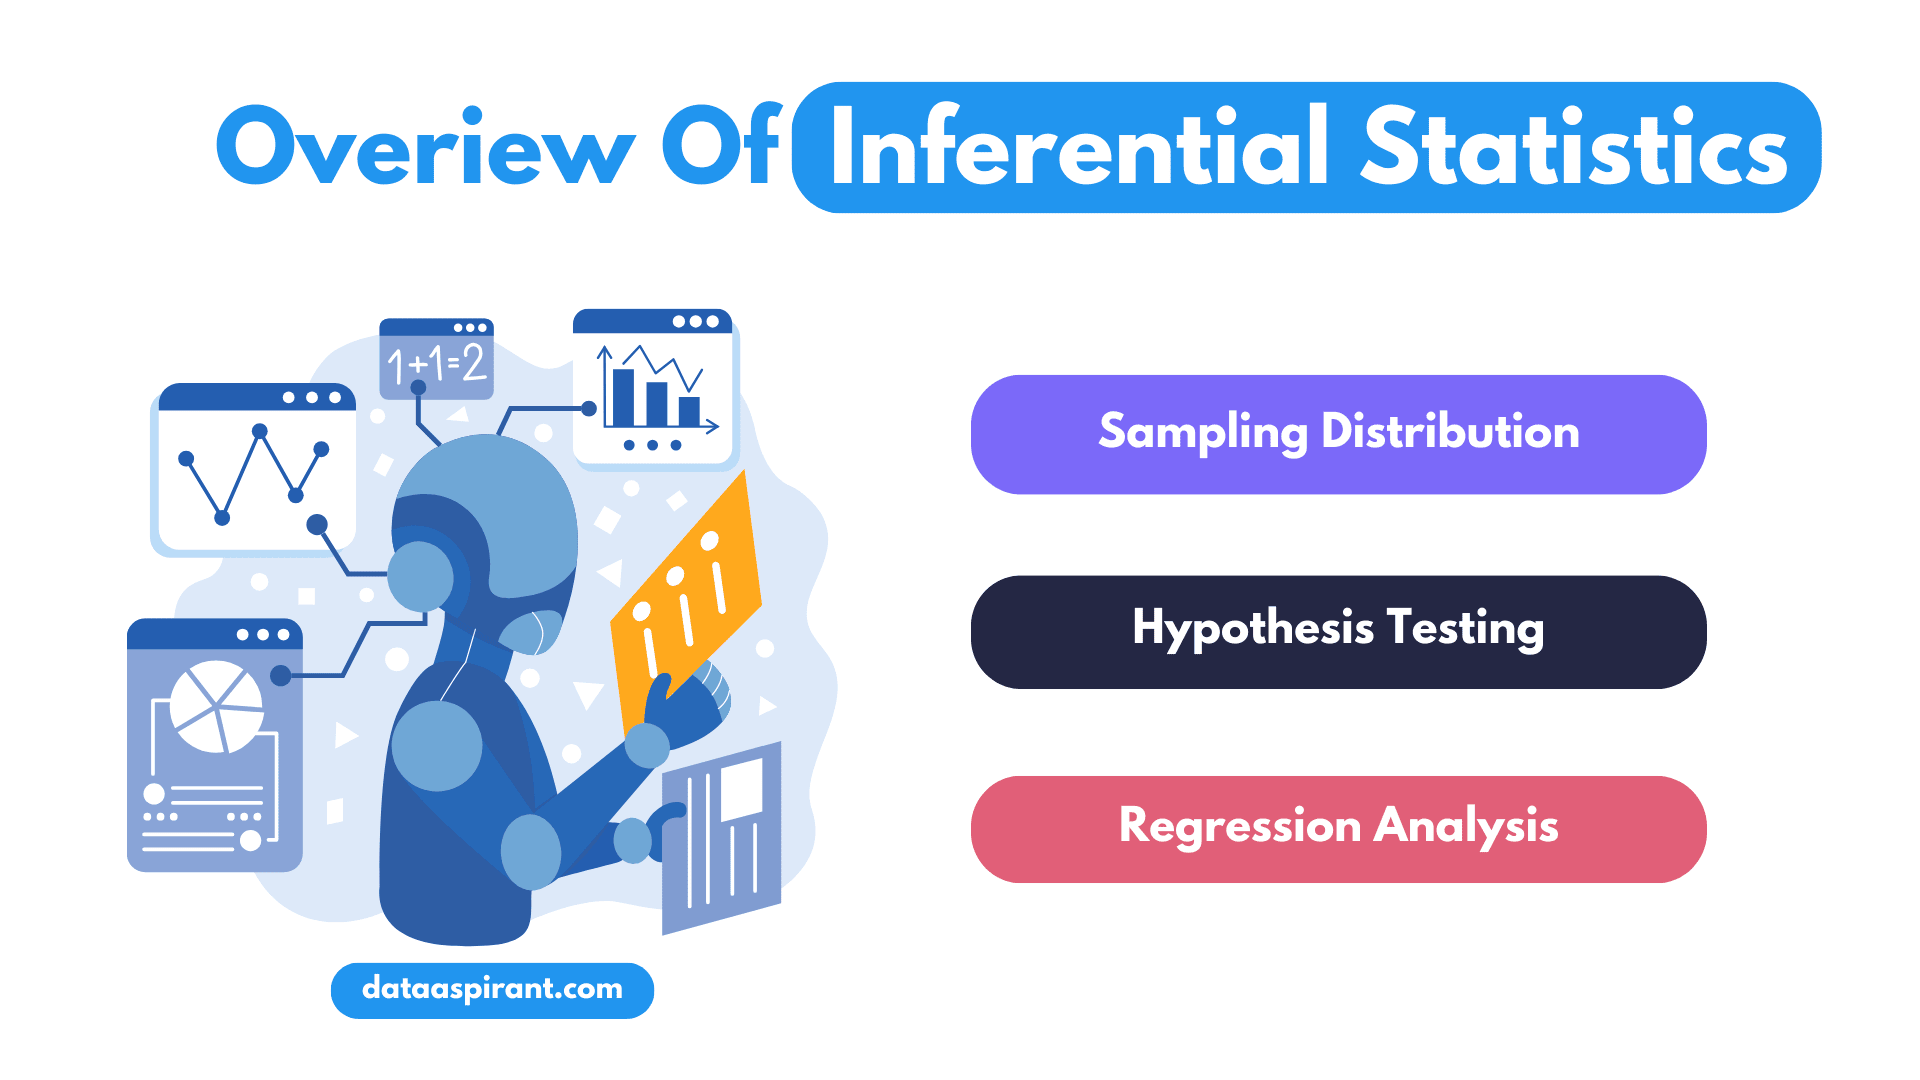 What Is Inferential Statistics?